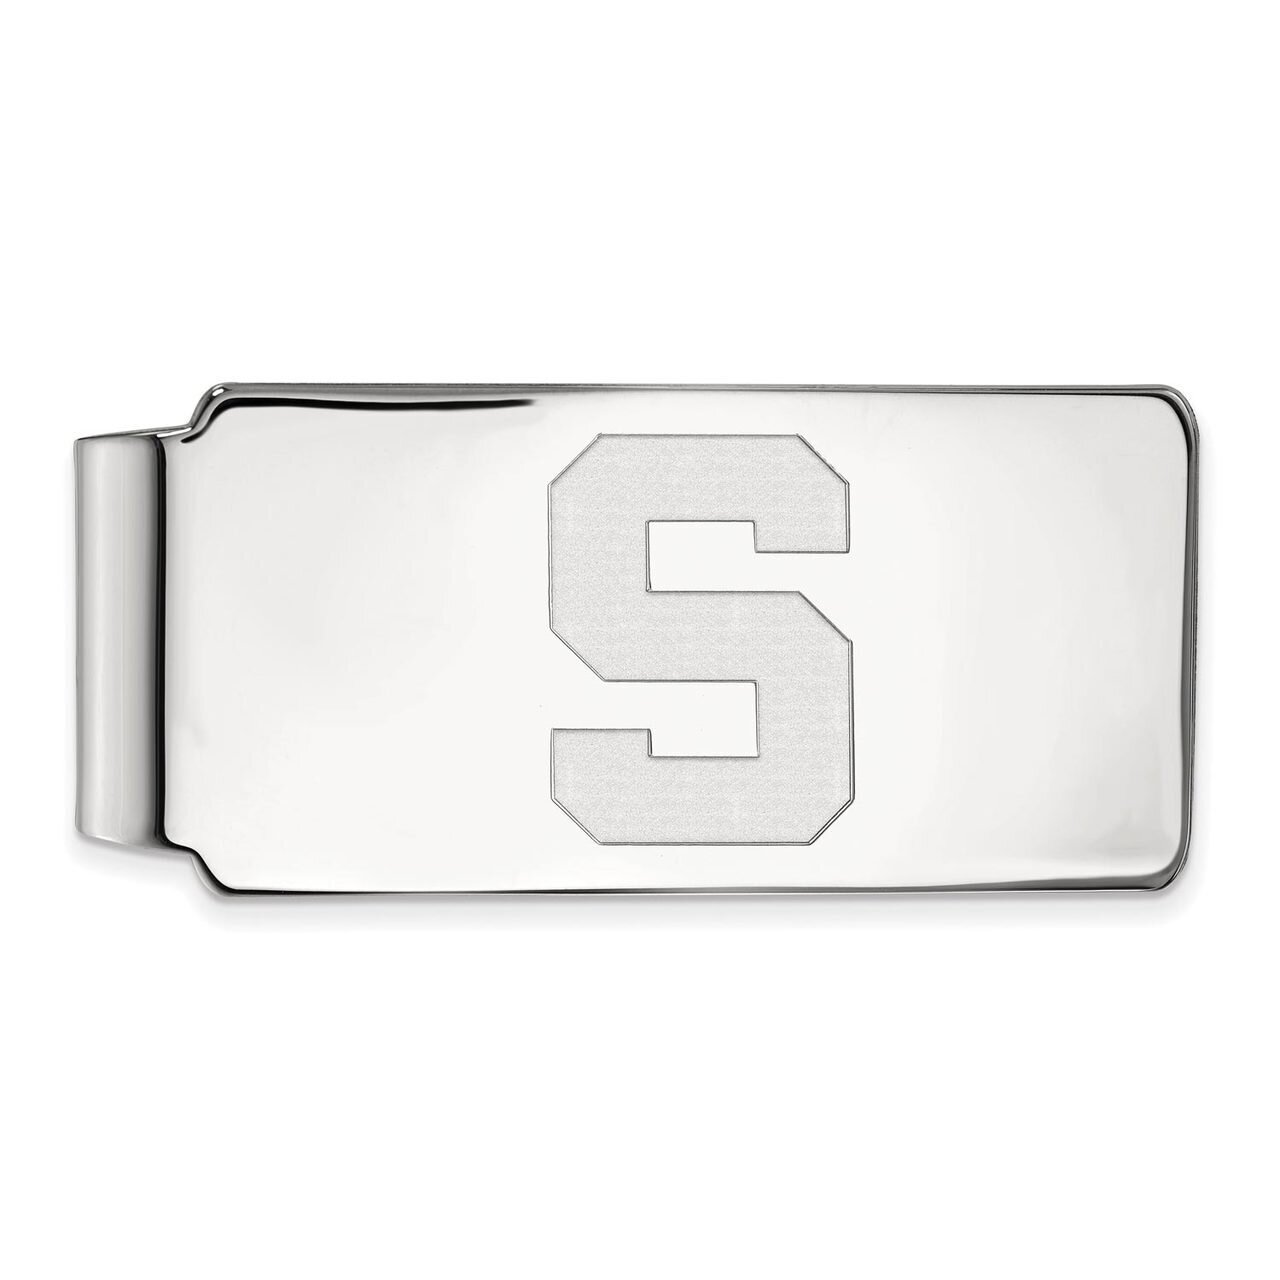 Michigan State University Money Clip Sterling Silver SS025MIS